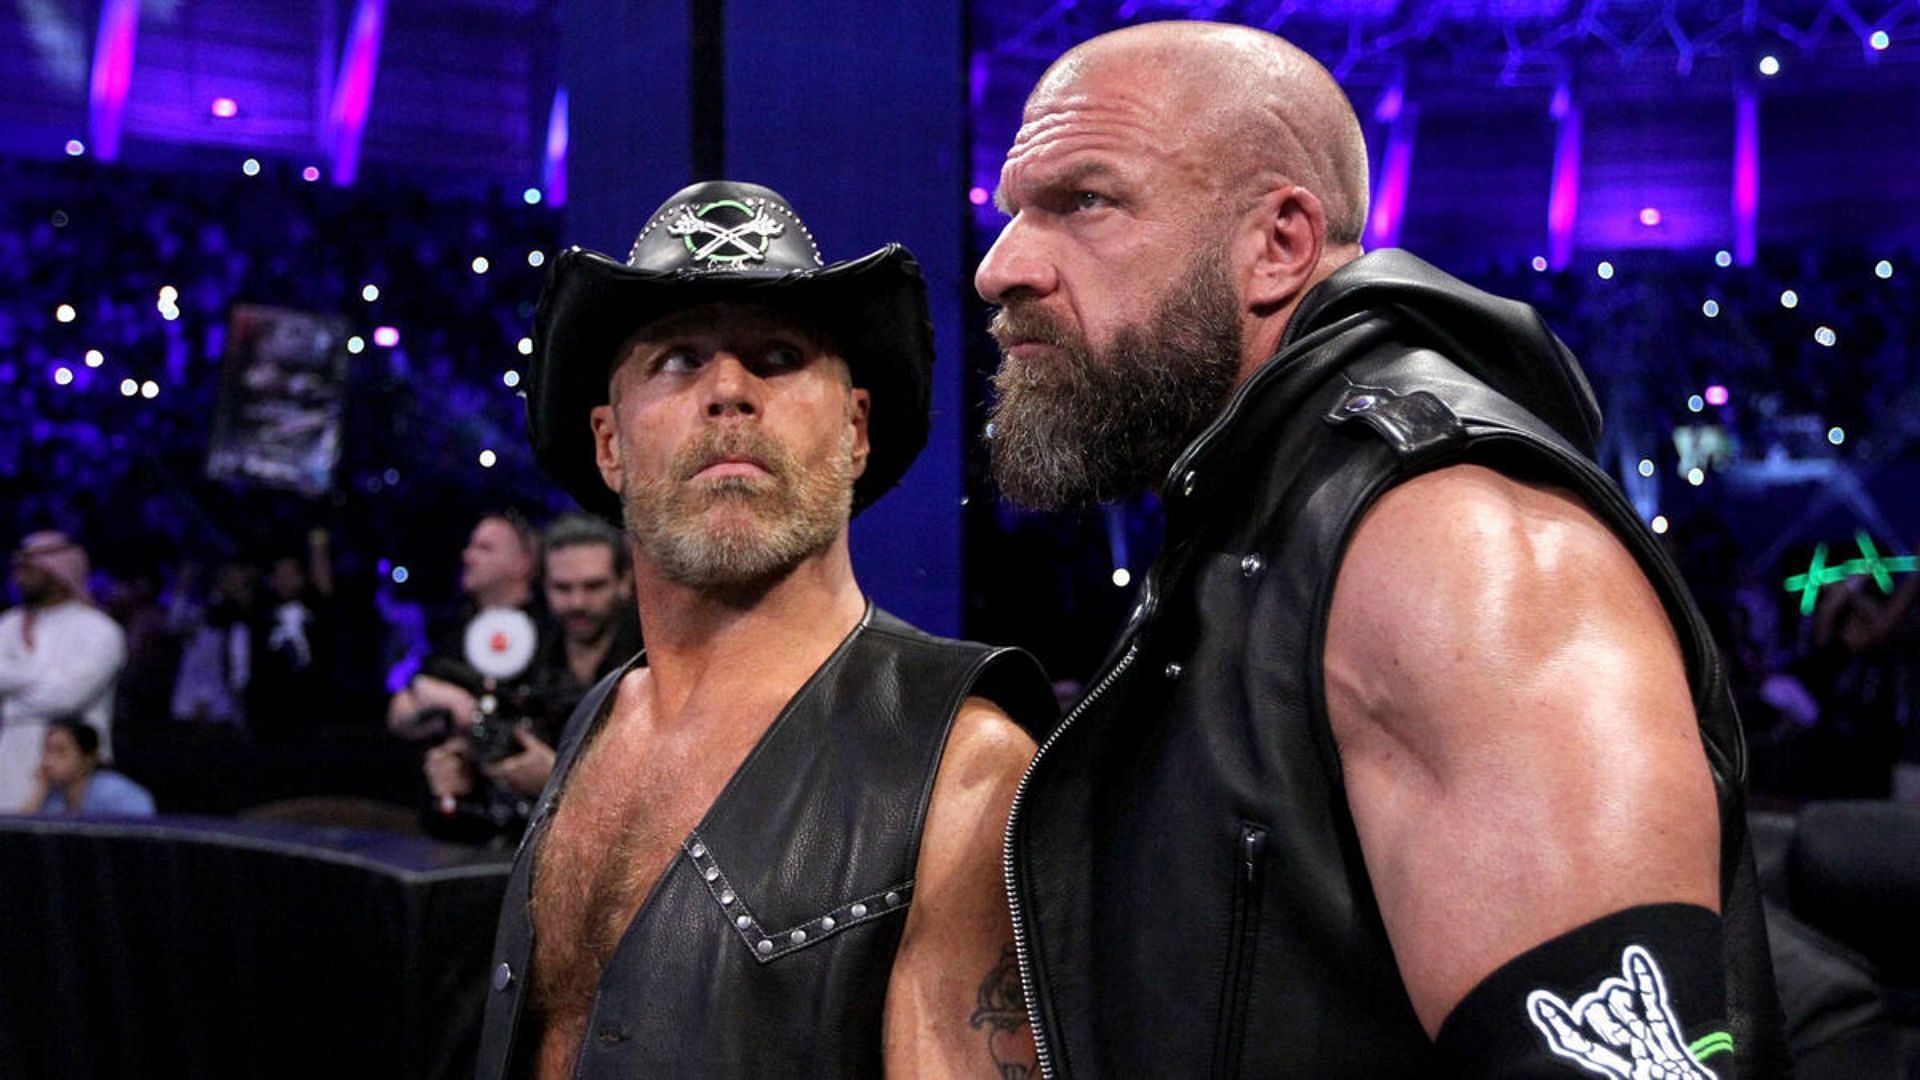 Shawn Michaels and Triple H are instrumental in the continued success of WWE NXT (Credit: WWE)